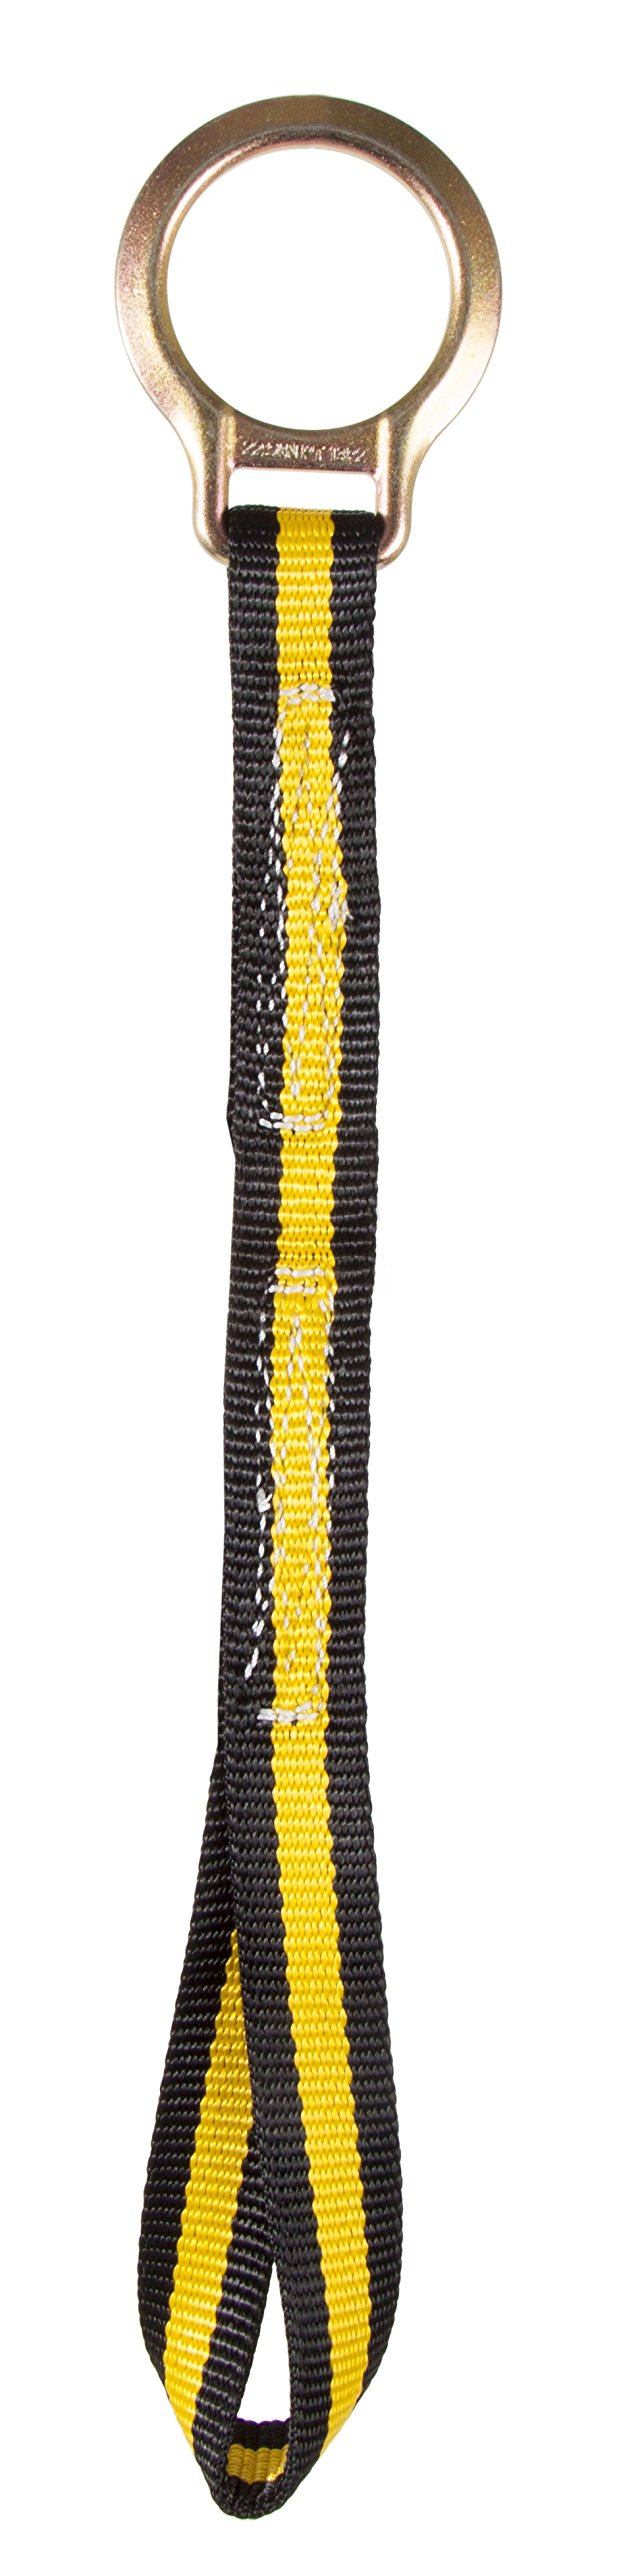  [AUSTRALIA] - Guardian 01122 18-Inch Extension Lanyard with Web Loop End